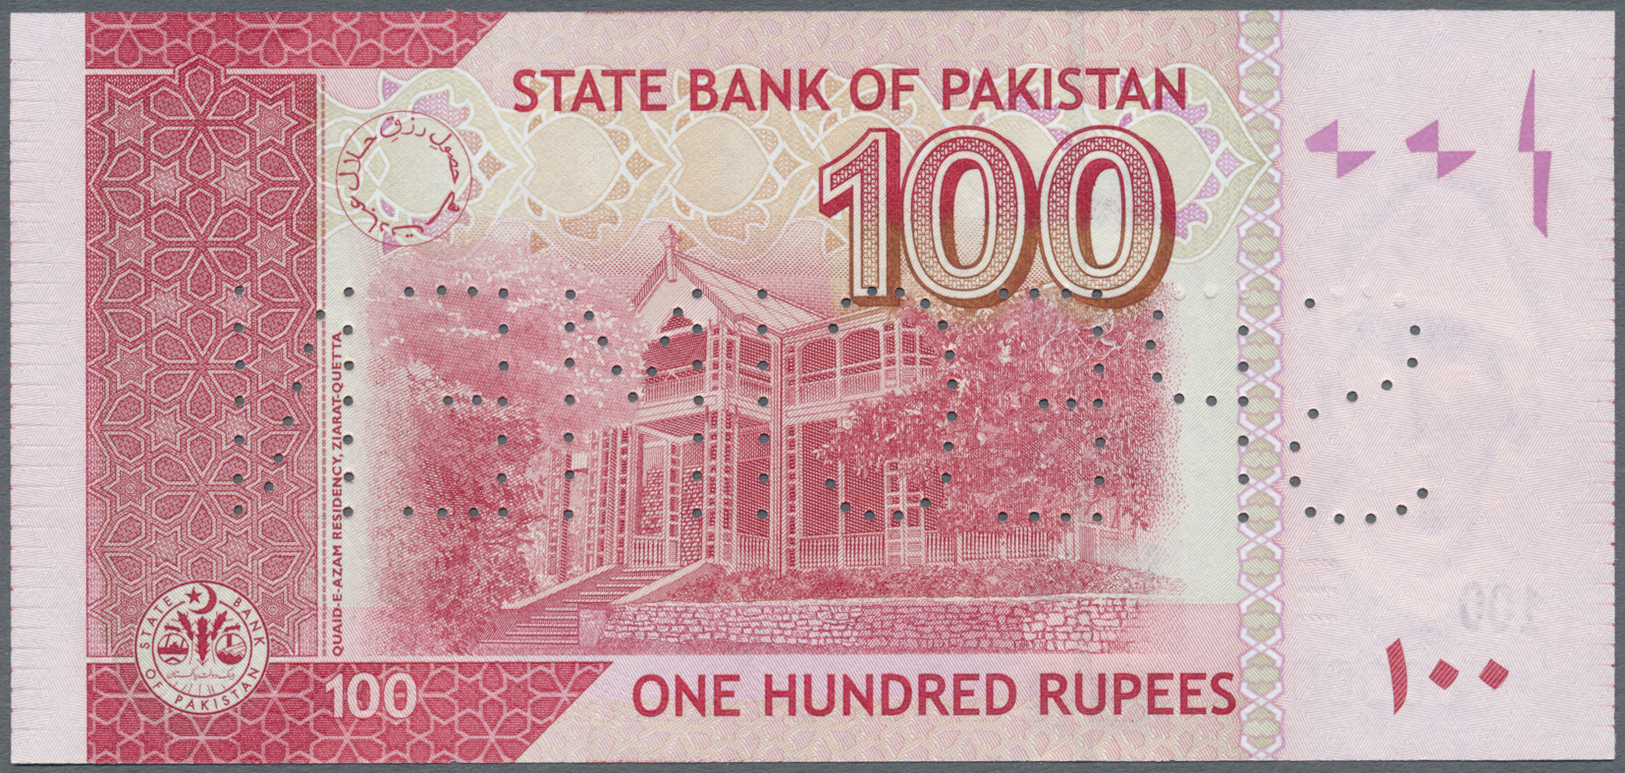 01933 Pakistan: 100 Rupees ND Specimen P. 48as With Specimen Perforation, Zero Serial Numbers, In Condition: UNC. - Pakistan